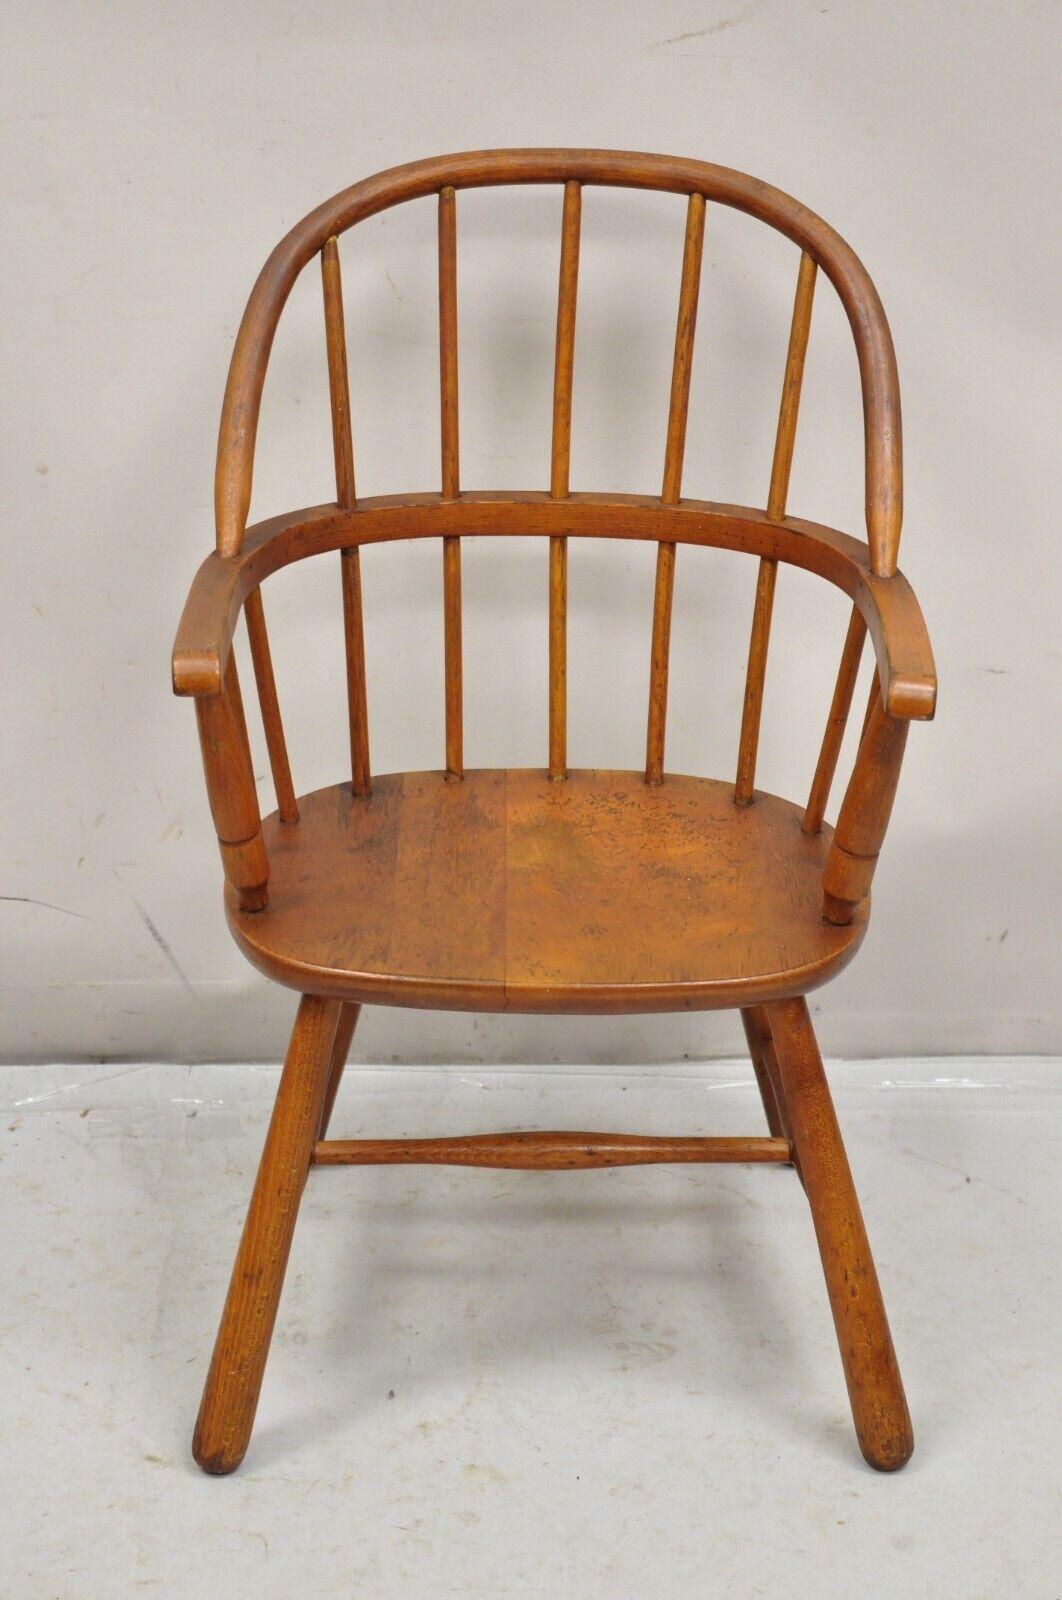 Antique Colonial Style Bentwood Maple Small Child's Windsor Arm Chair. Circa Early to Mid 1900s. Measurements: 26.5